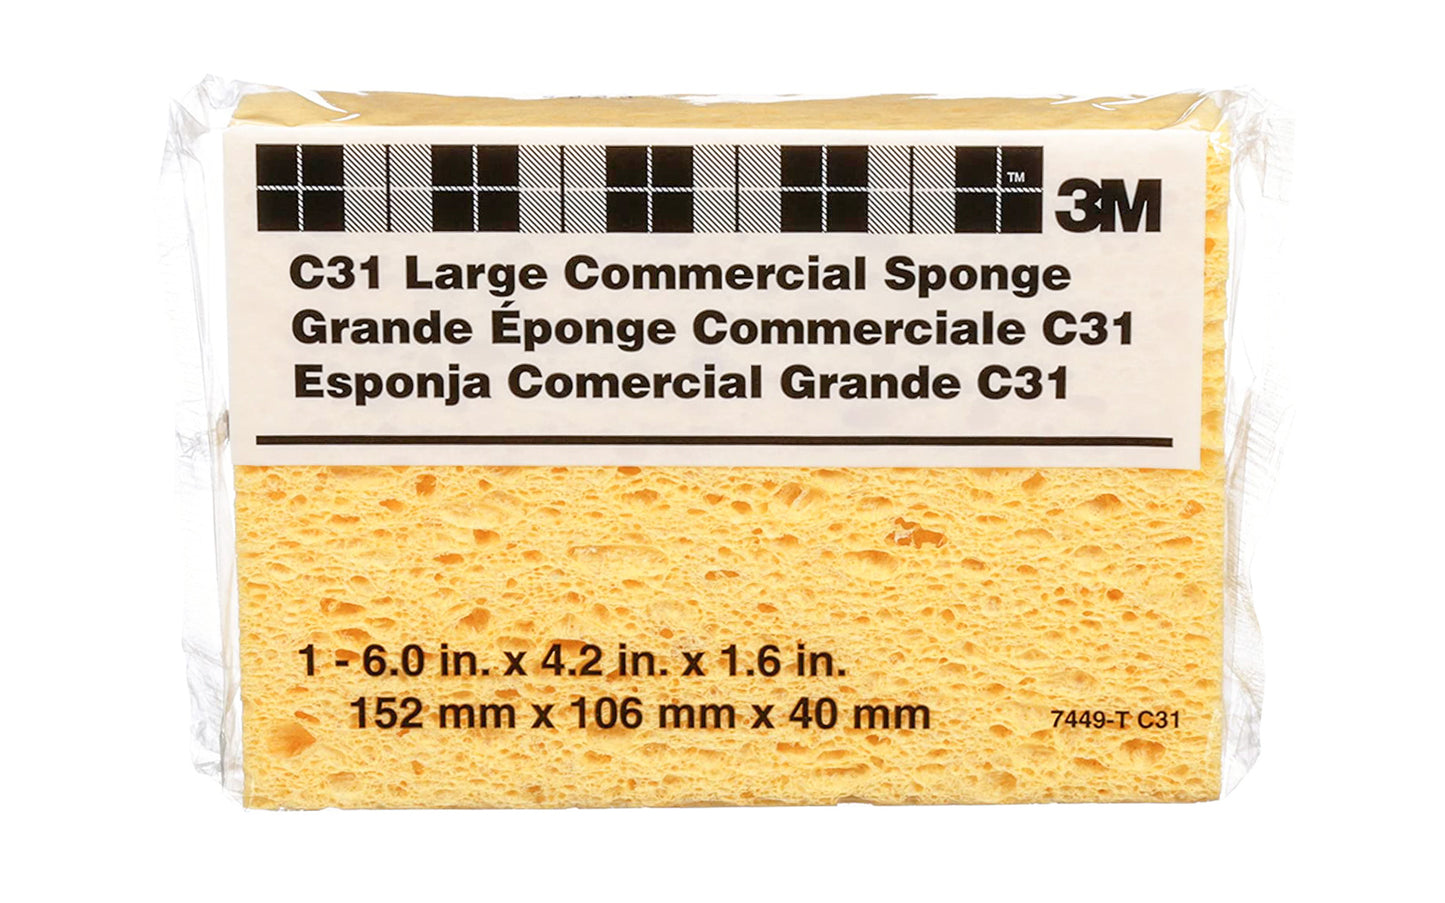 This 3M C31 Large Commercial Sponge - 6" x 4.2" x 1.6". Commercial-sized sponge for jobs when you need a long-lasting, industrial product. Made in USA. 053200074494. Model C31